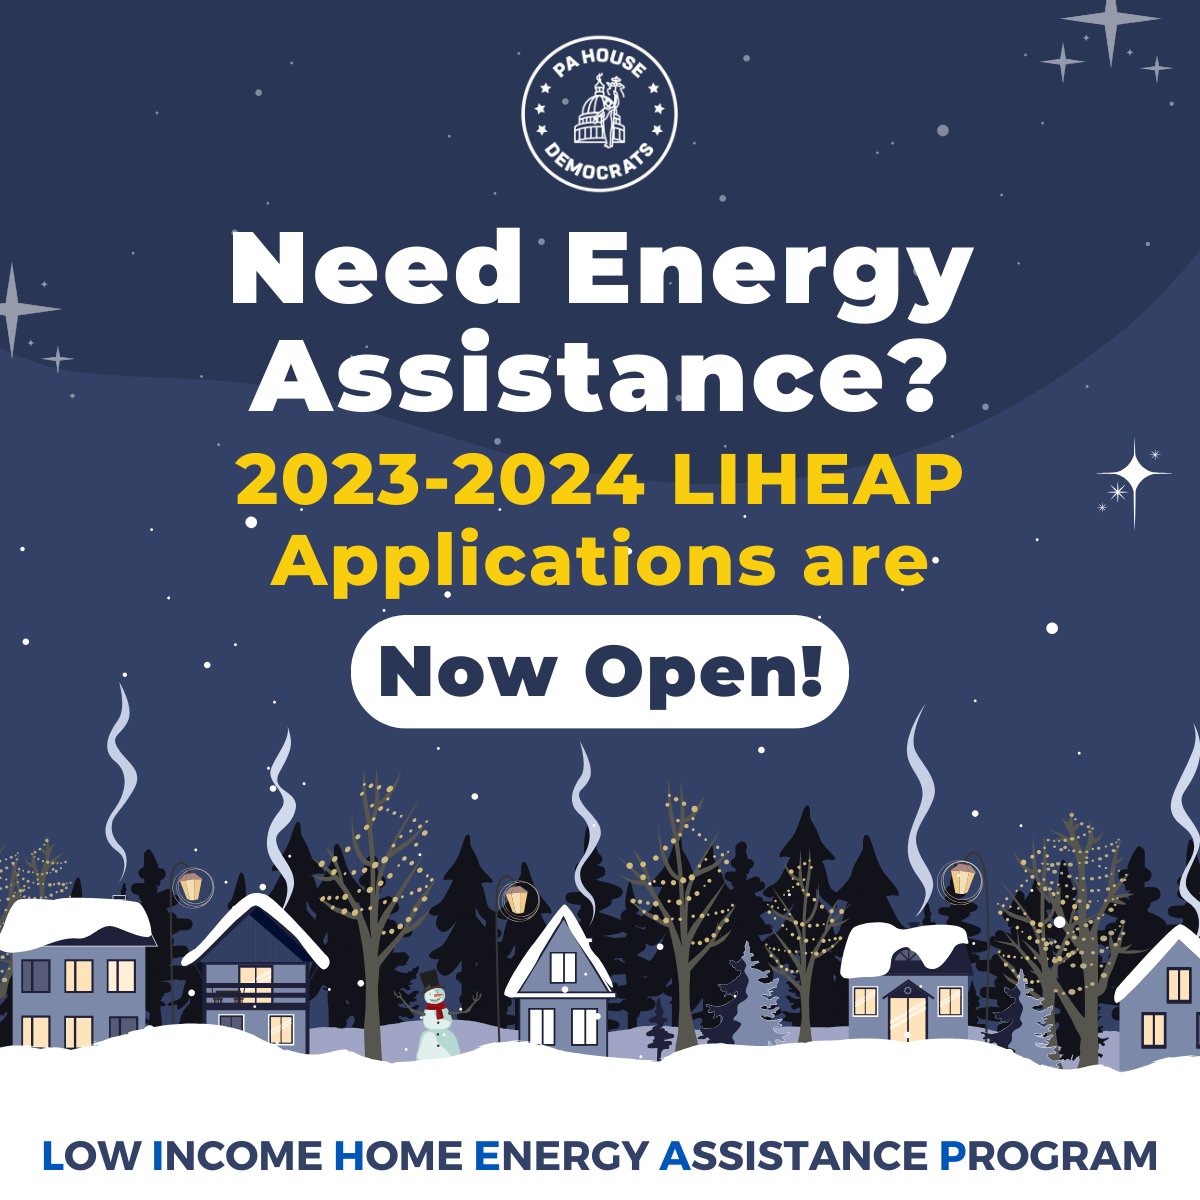 Low-Income Home Energy Assistance Program application are now open! LIHEAP helps families living on low incomes pay their heating bills in the form of a cash grant. For more information visit: humanservices.state.pa.us/LIHEAP_BENEFIT…